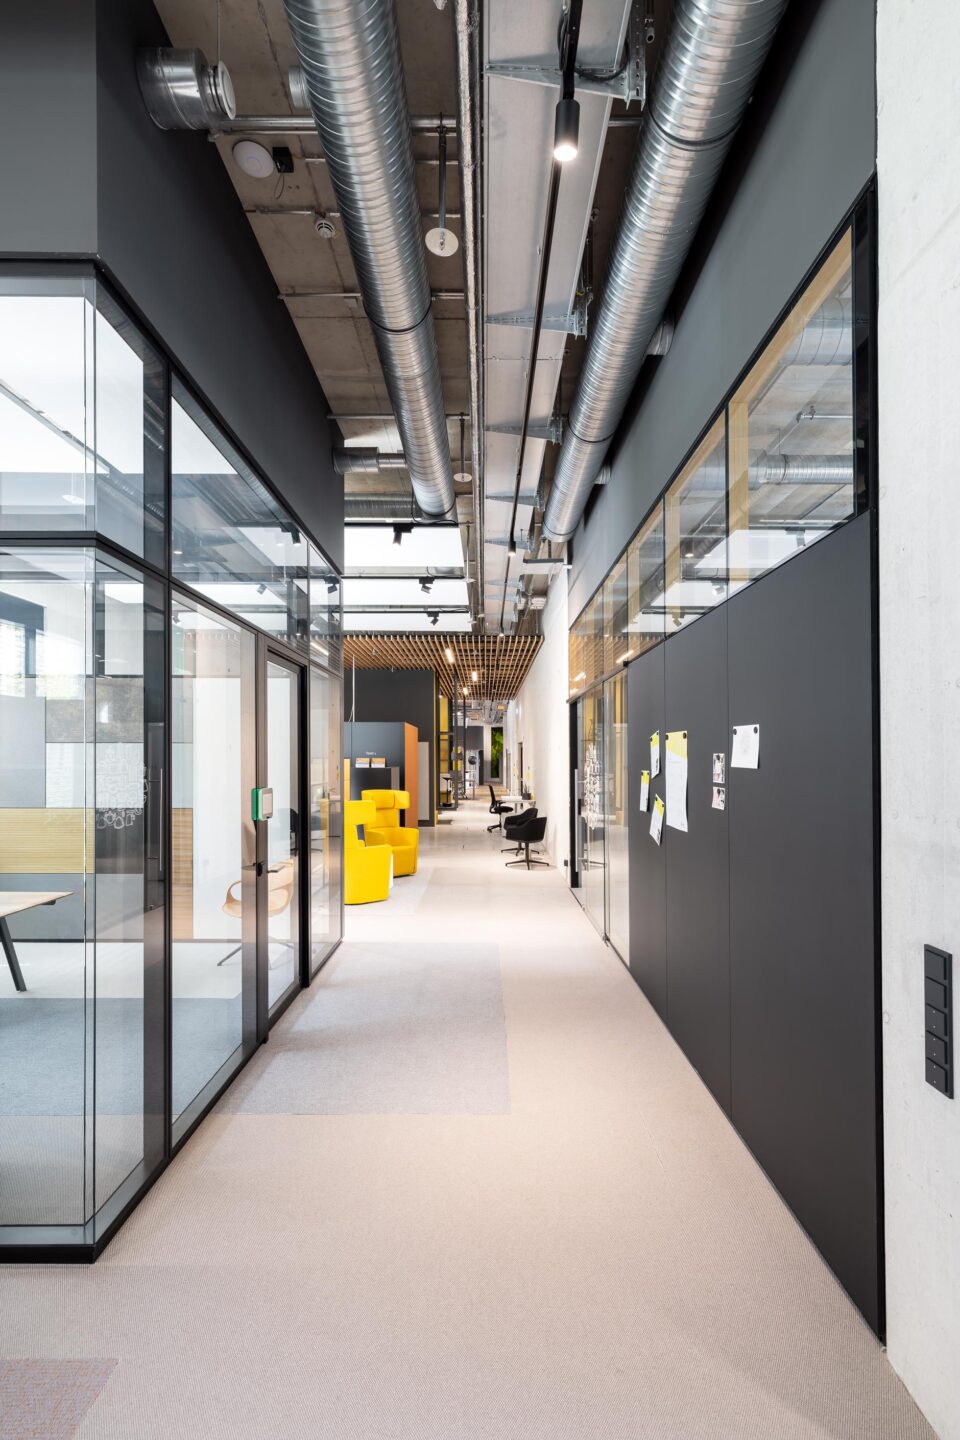 System walls from feco │ Best Workspaces Award 2022 │ flexible workshop space